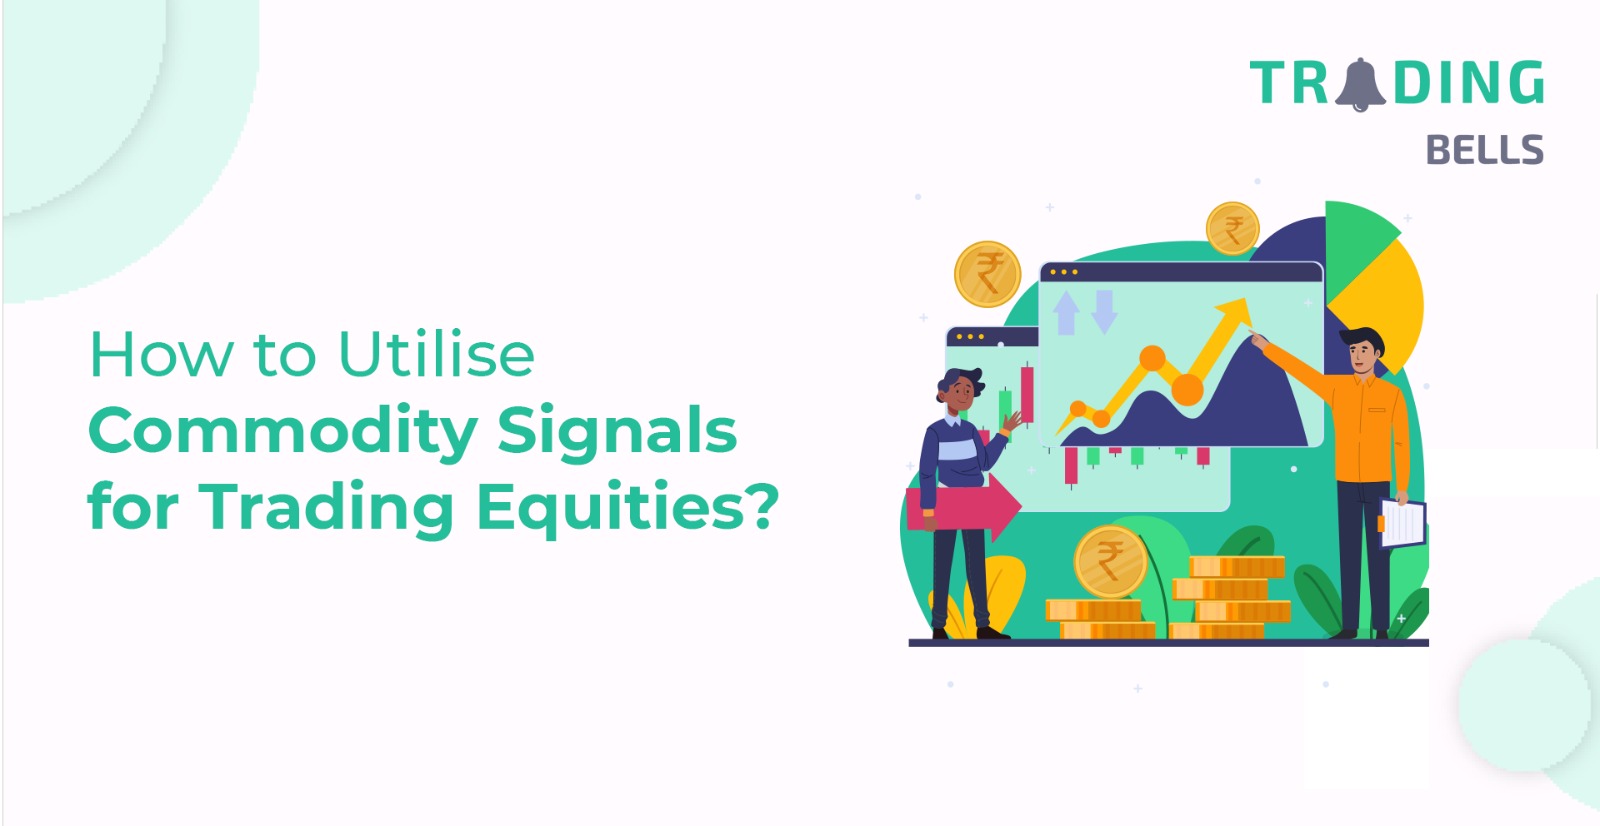 How to Utilise Commodity Signals for Trading Equities